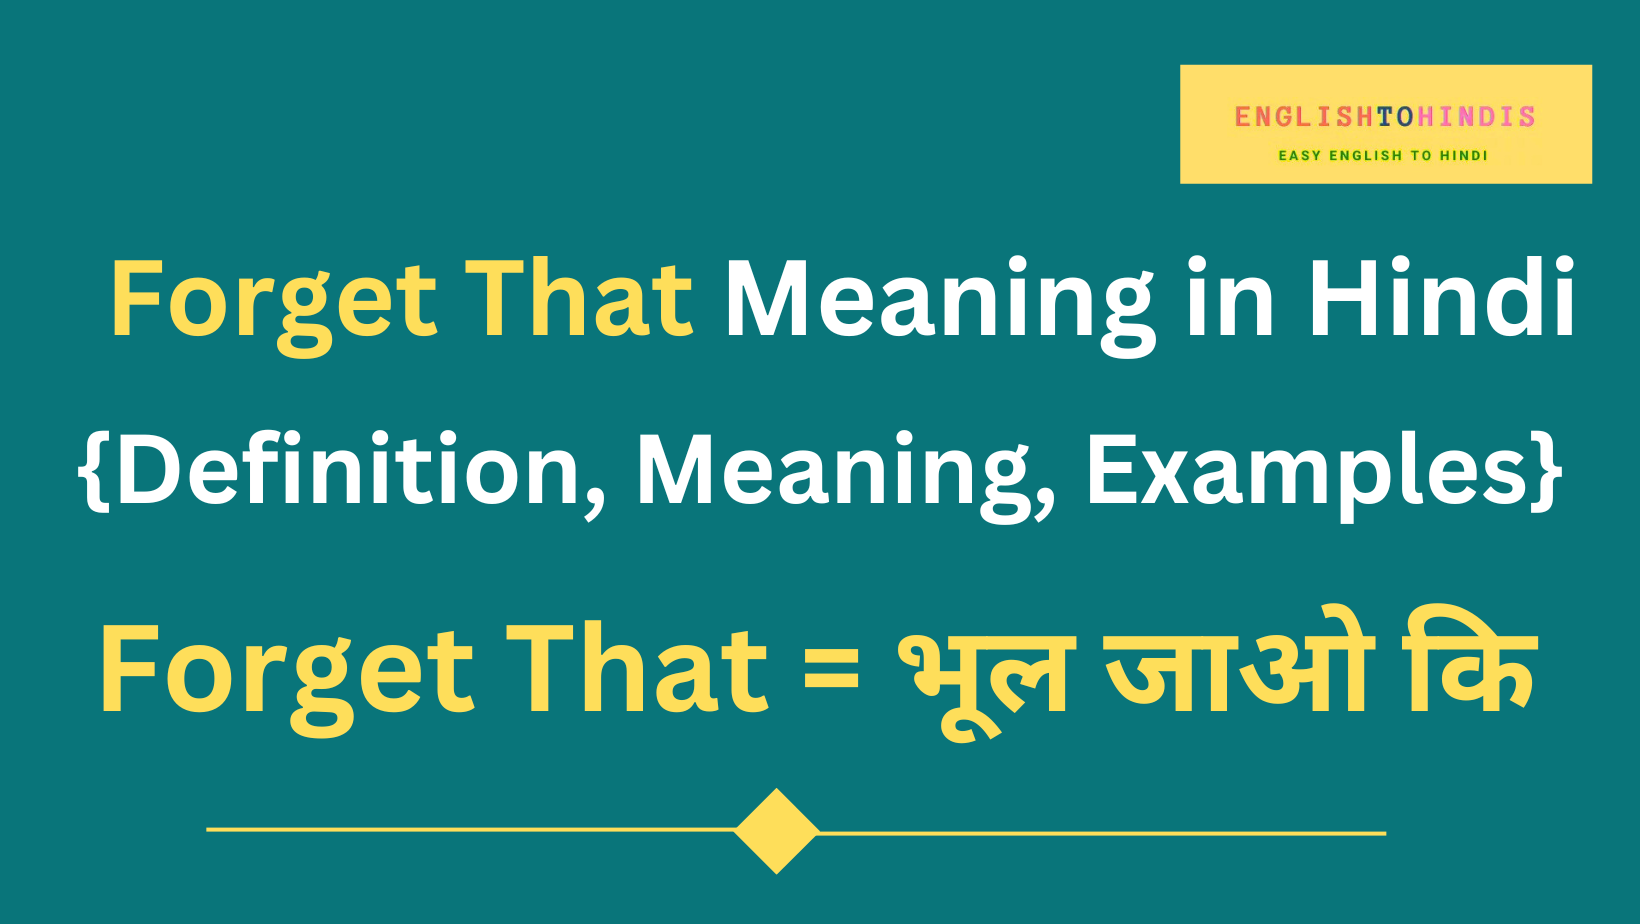 Forget That Meaning in Hindi